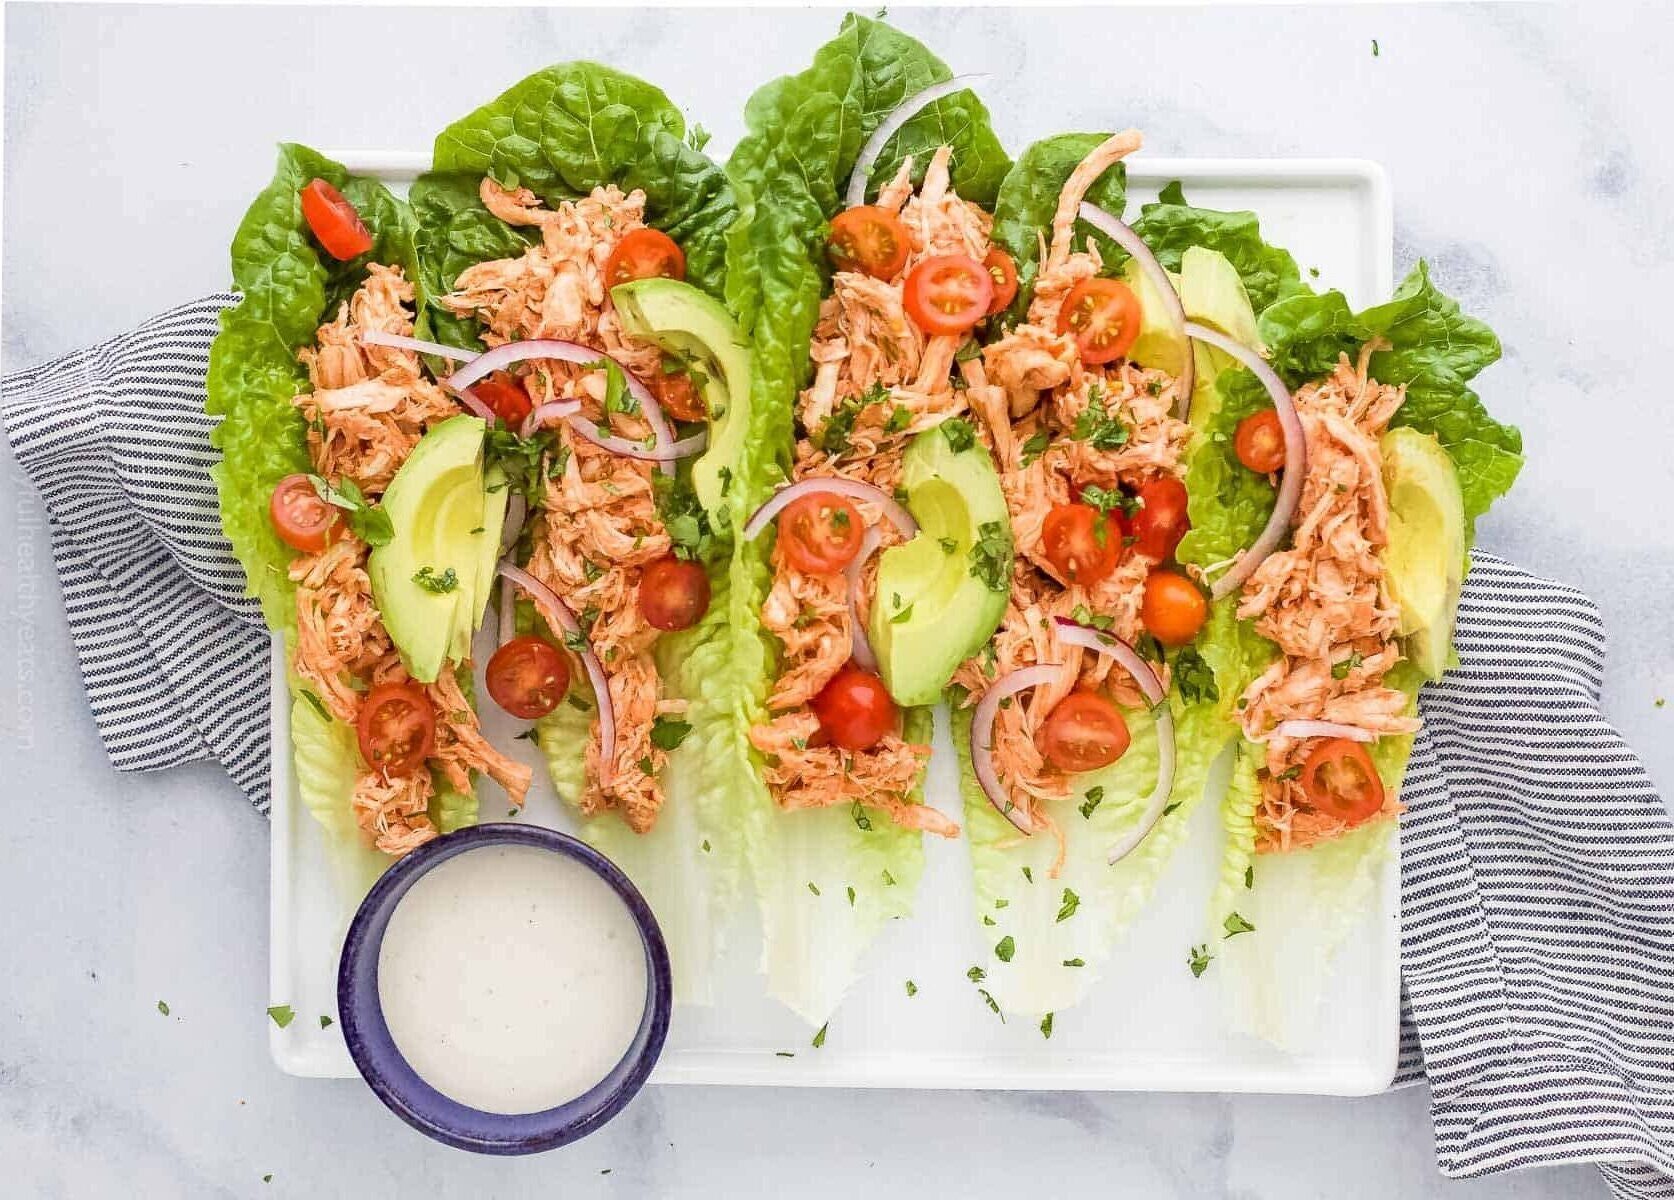 Leftover Rotisserie Chicken Recipes: Low-Carb Buffalo Chicken Lettuce Wraps